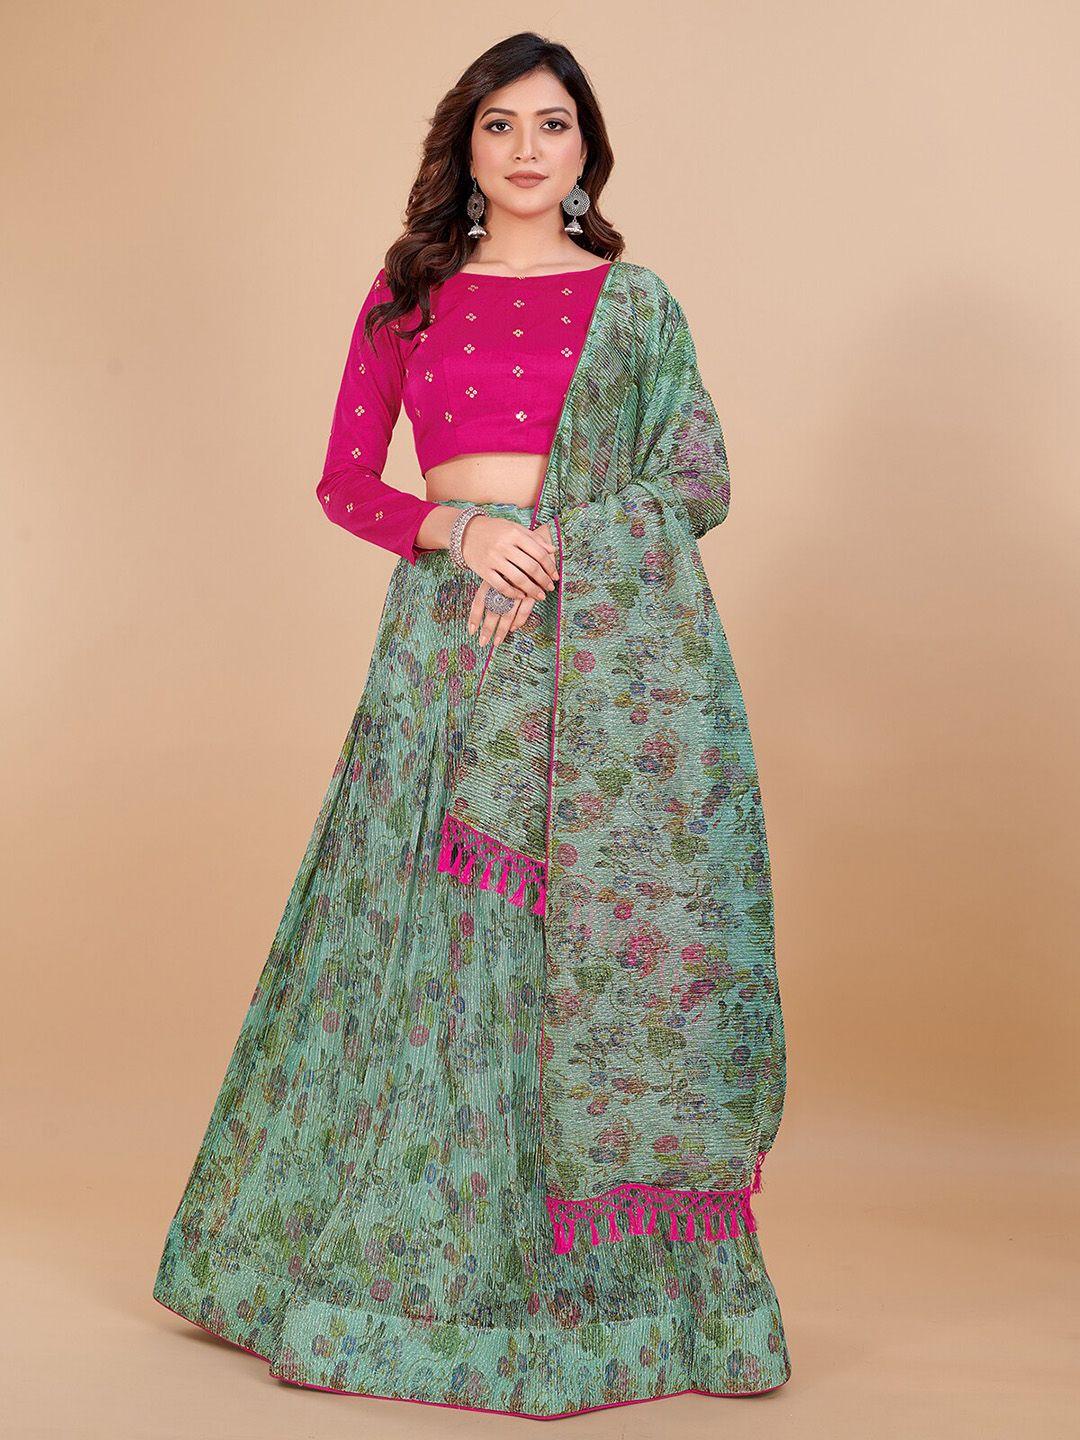 kalini floral printed embellished ready to wear lehenga & unstitched blouse with dupatta